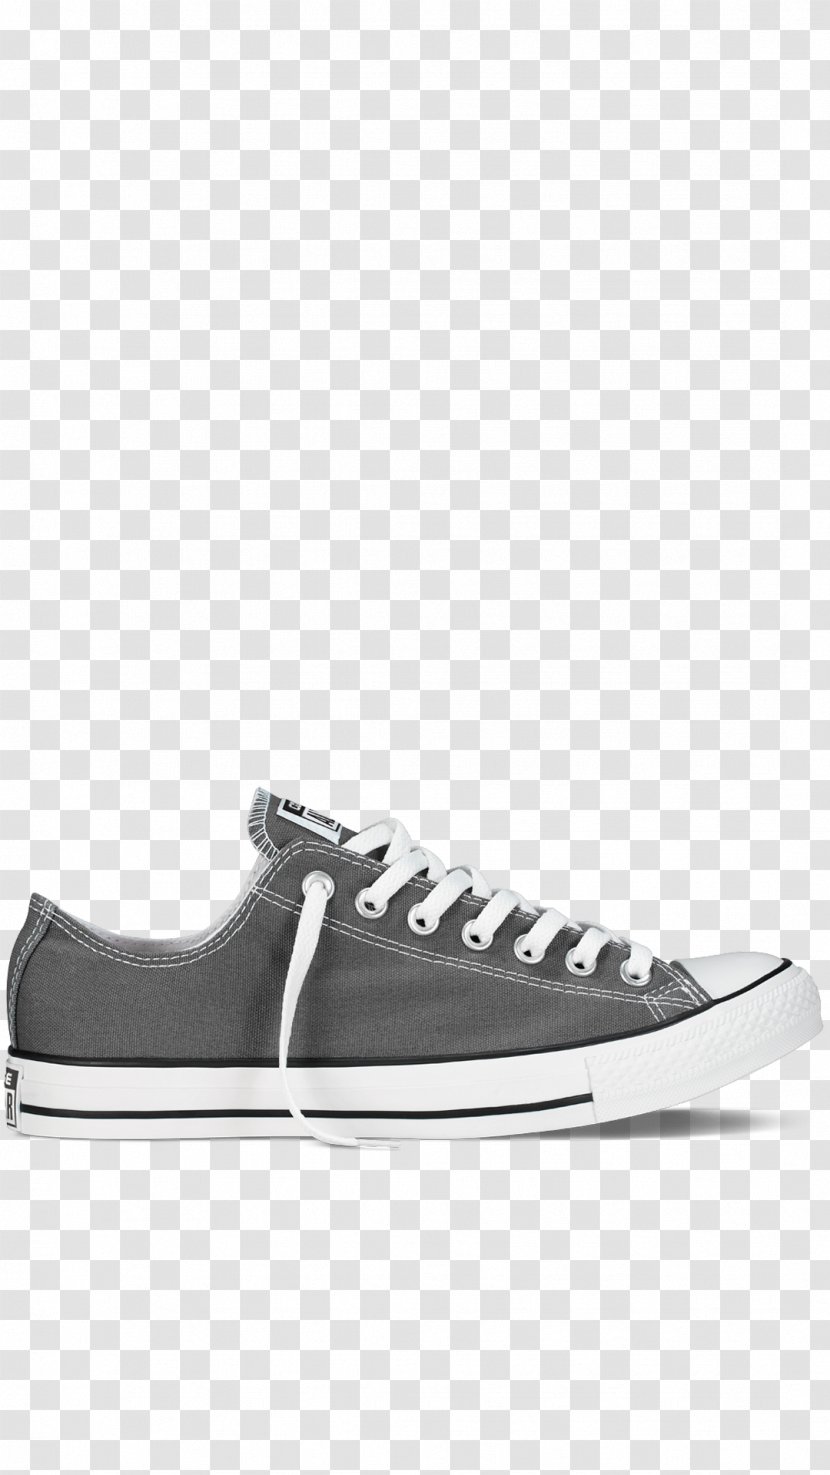 Chuck Taylor All-Stars Converse Sneakers Shoe High-top - Footwear - Adidas Transparent PNG